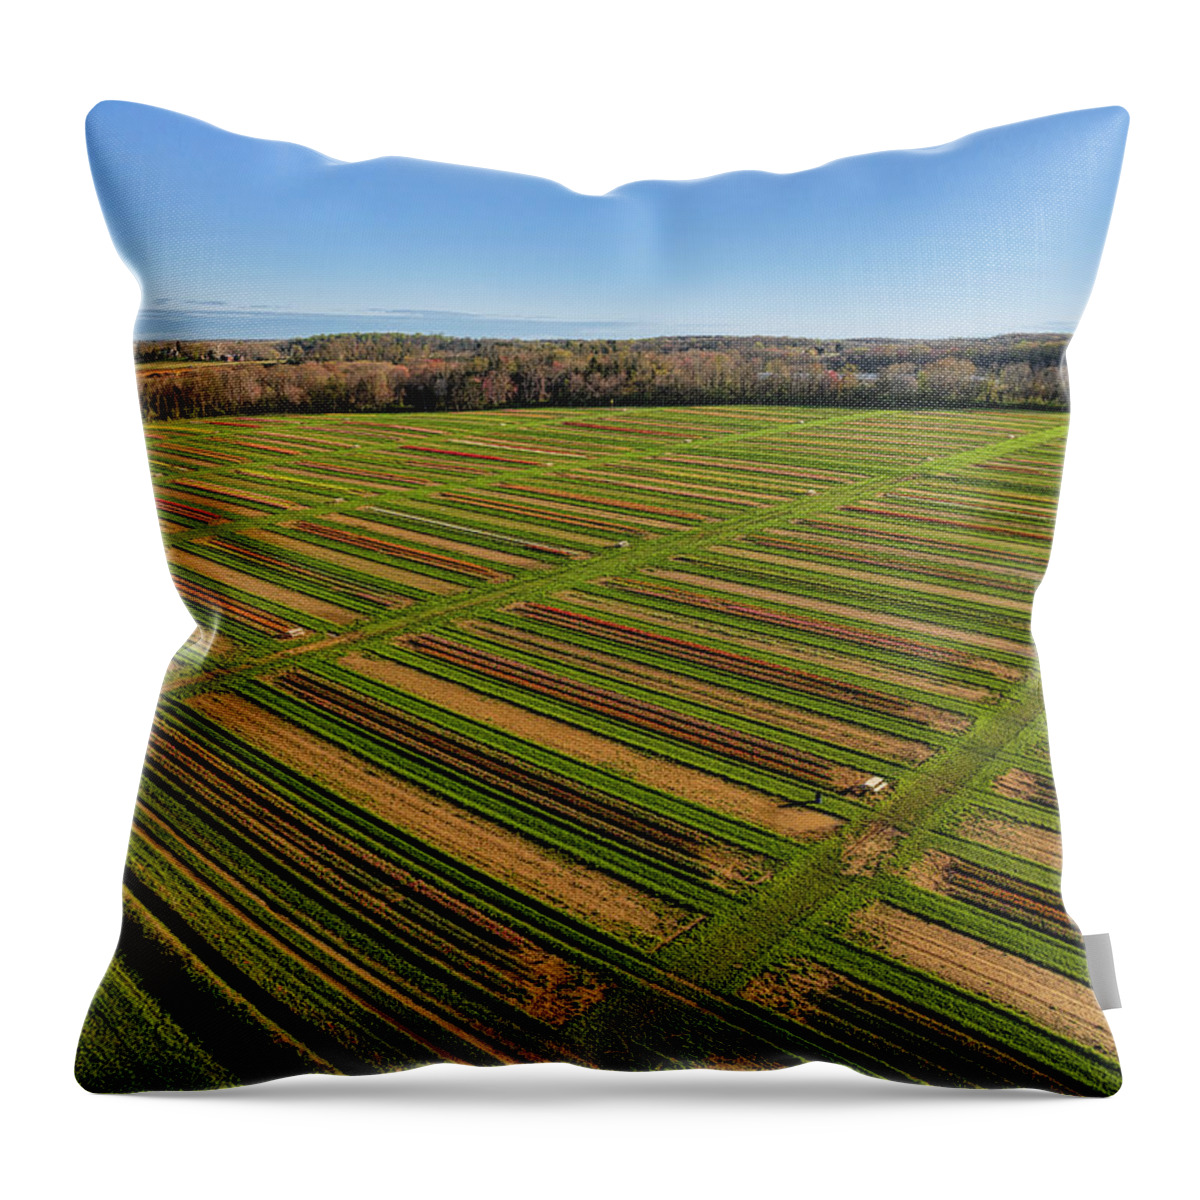 Tulip Throw Pillow featuring the photograph Aerial Tulip Farm #5 by Susan Candelario